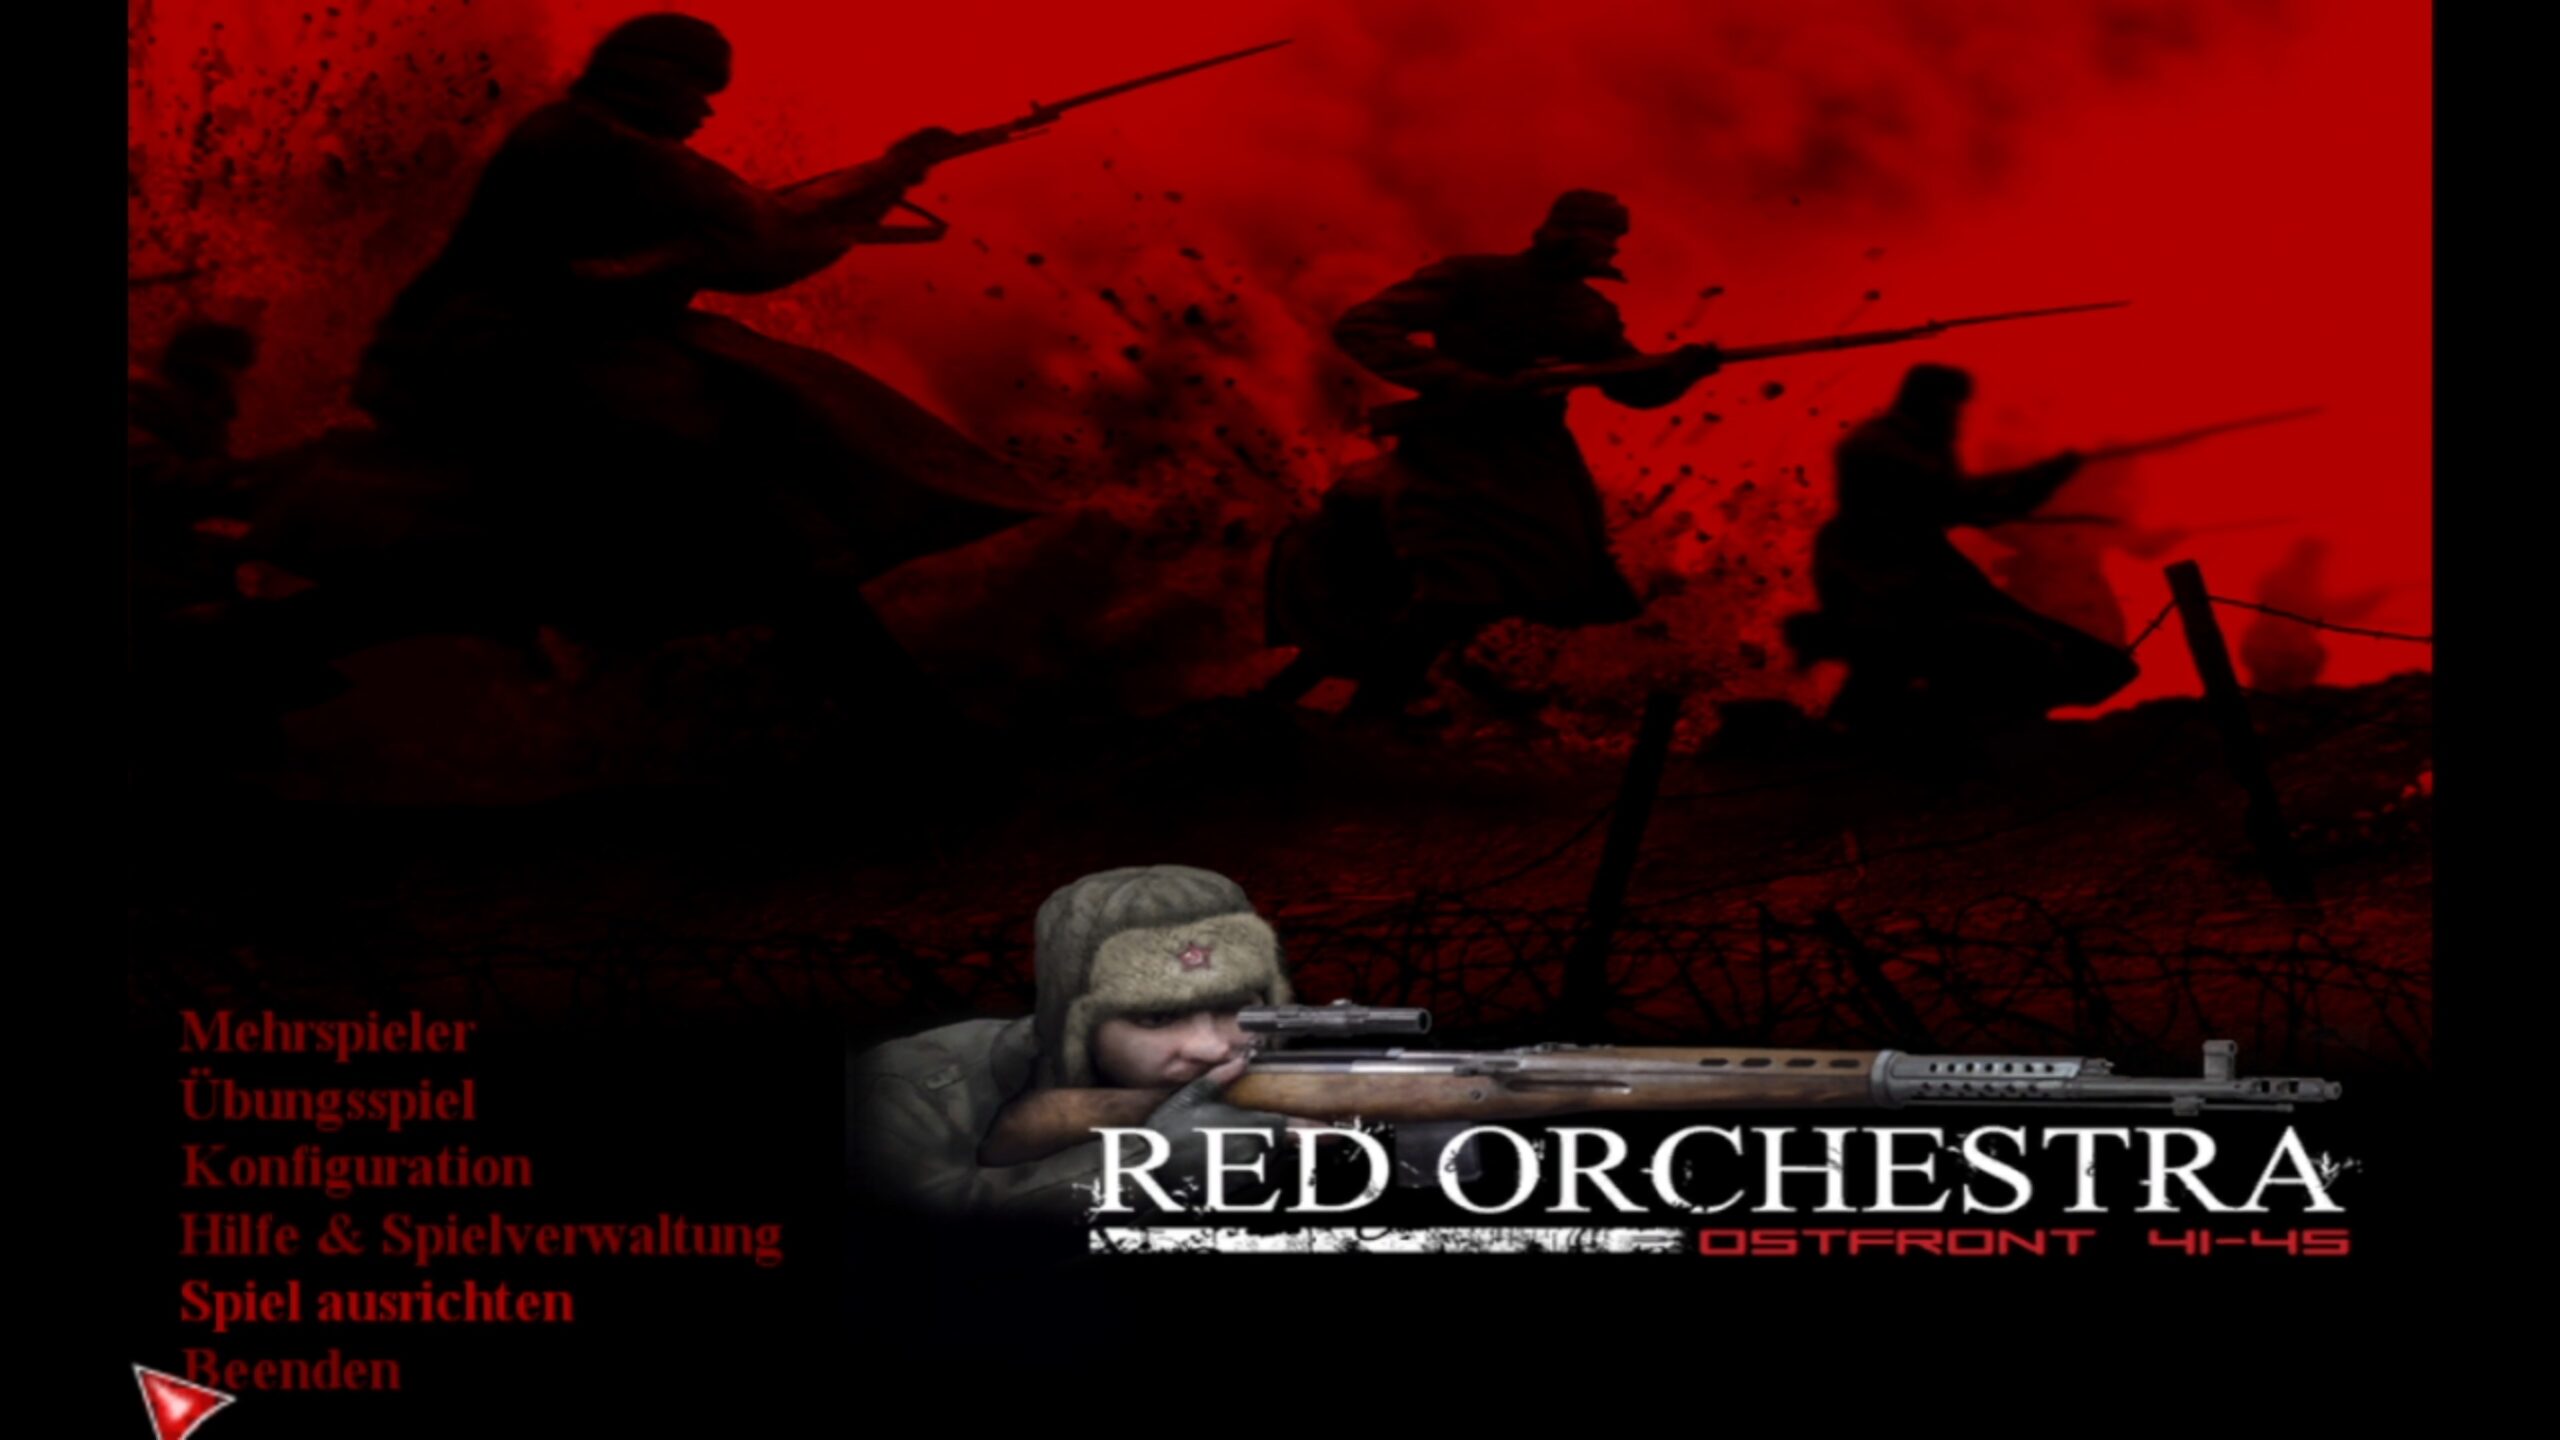 Red Orchestra Ostfront 41 - 45